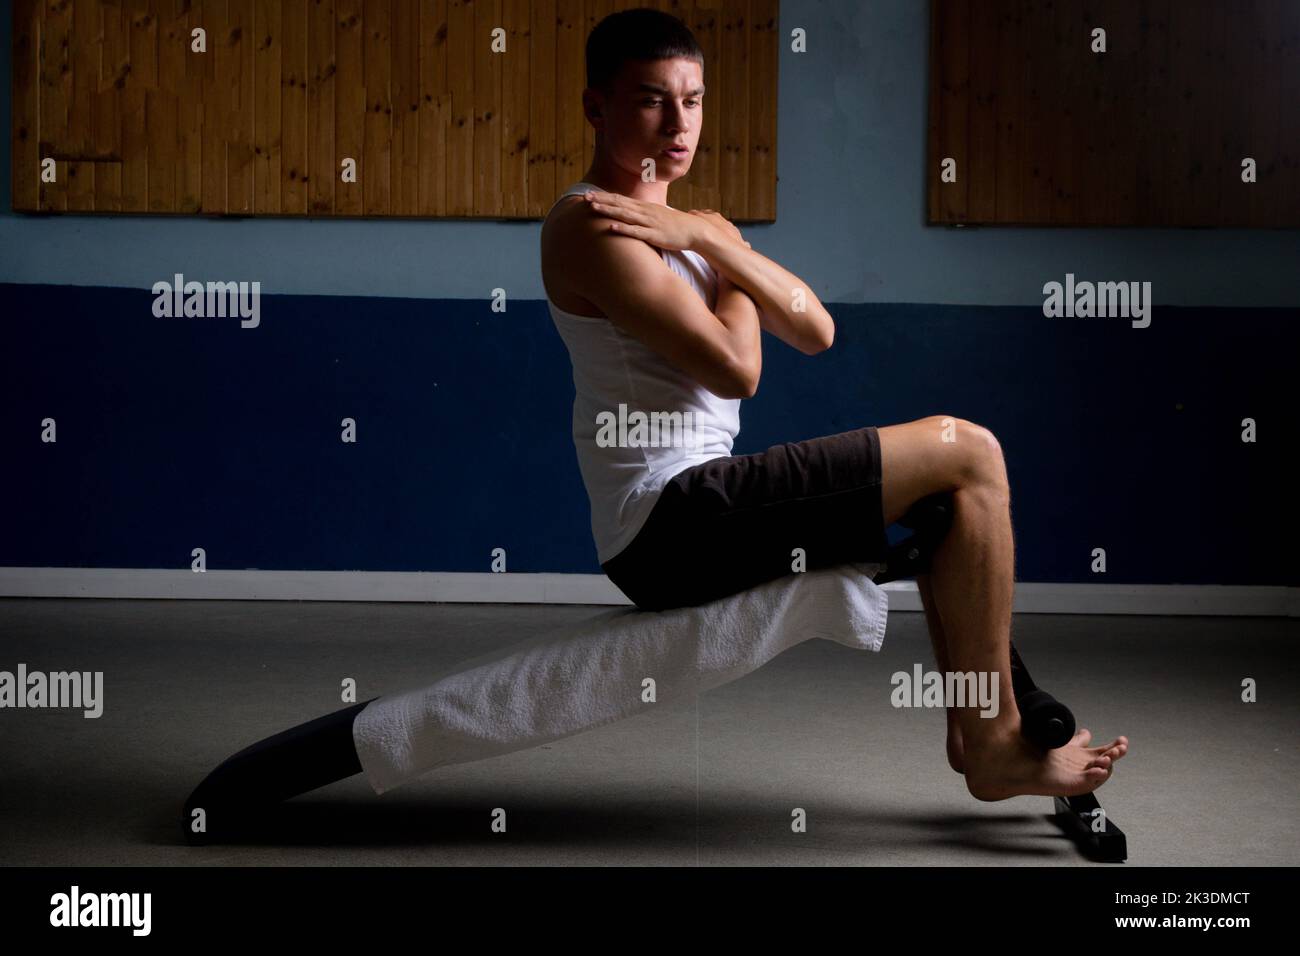 19 year old teenage boy doing situps on an excercise bench in a tank top Stock Photo